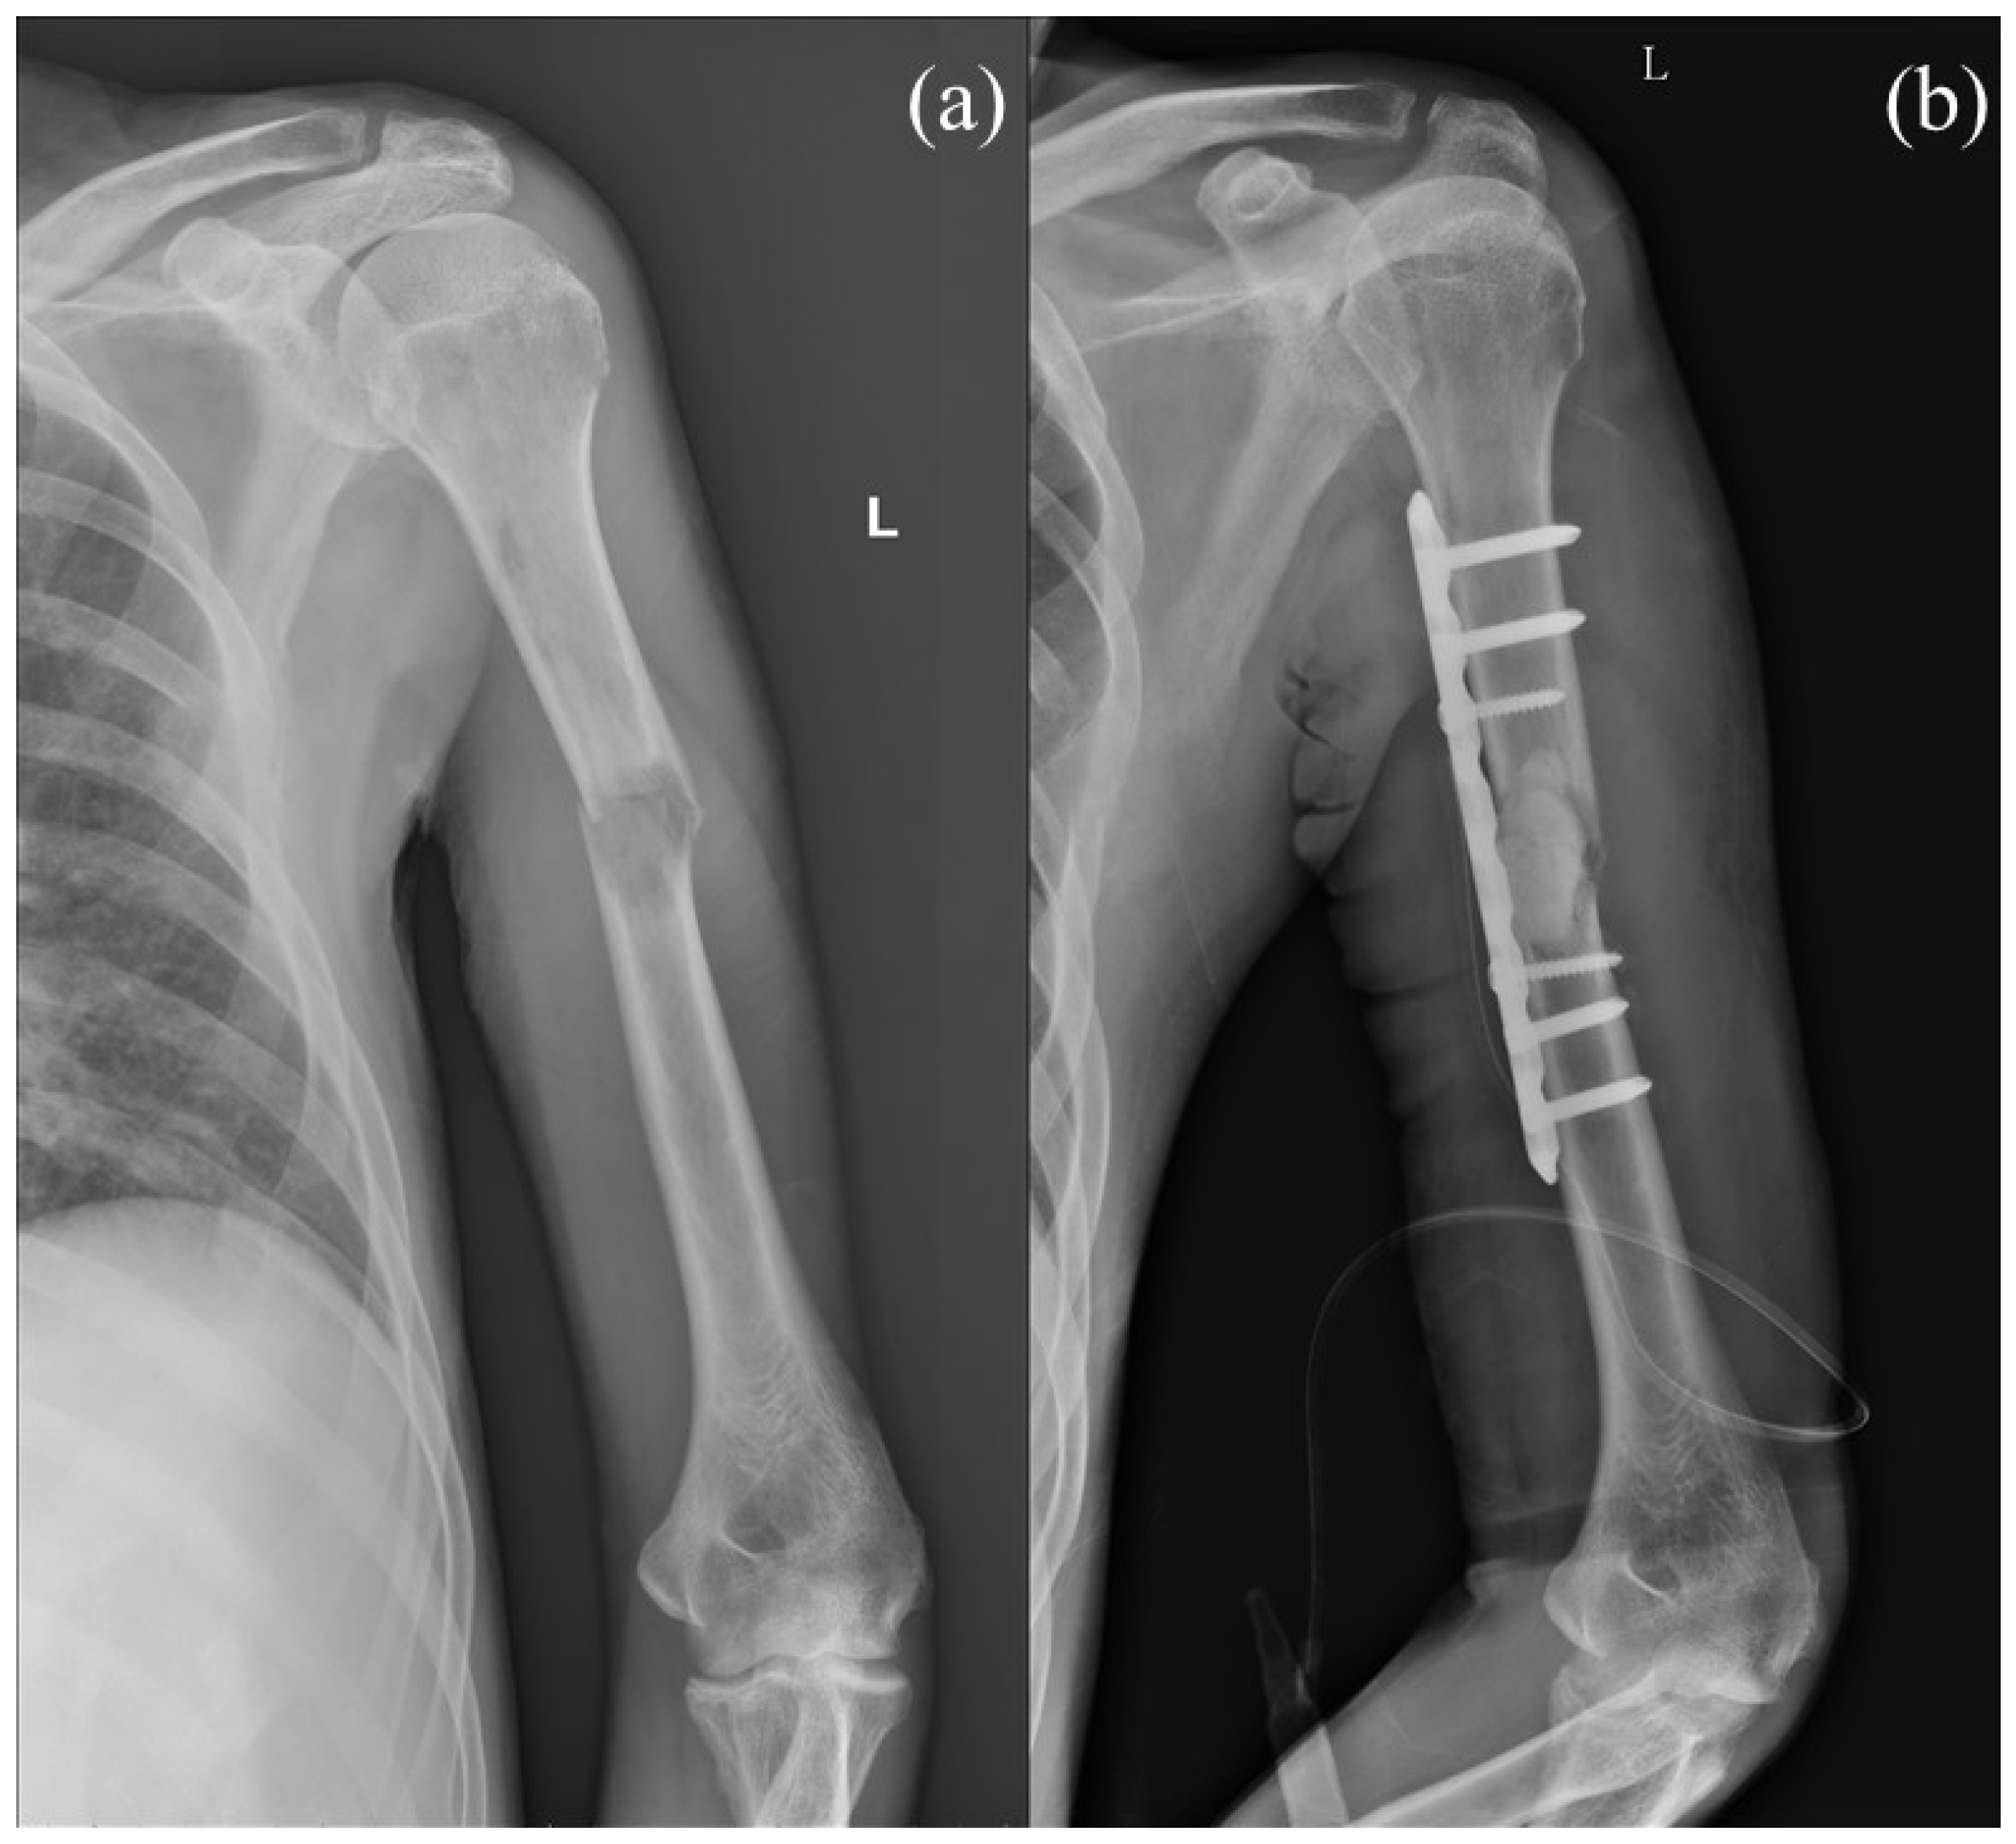 JCM | Free Full-Text | Influence of Fracture Reduction on the Functional  Outcome after Intramedullary Nail Osteosynthesis in Proximal Humerus  Fractures